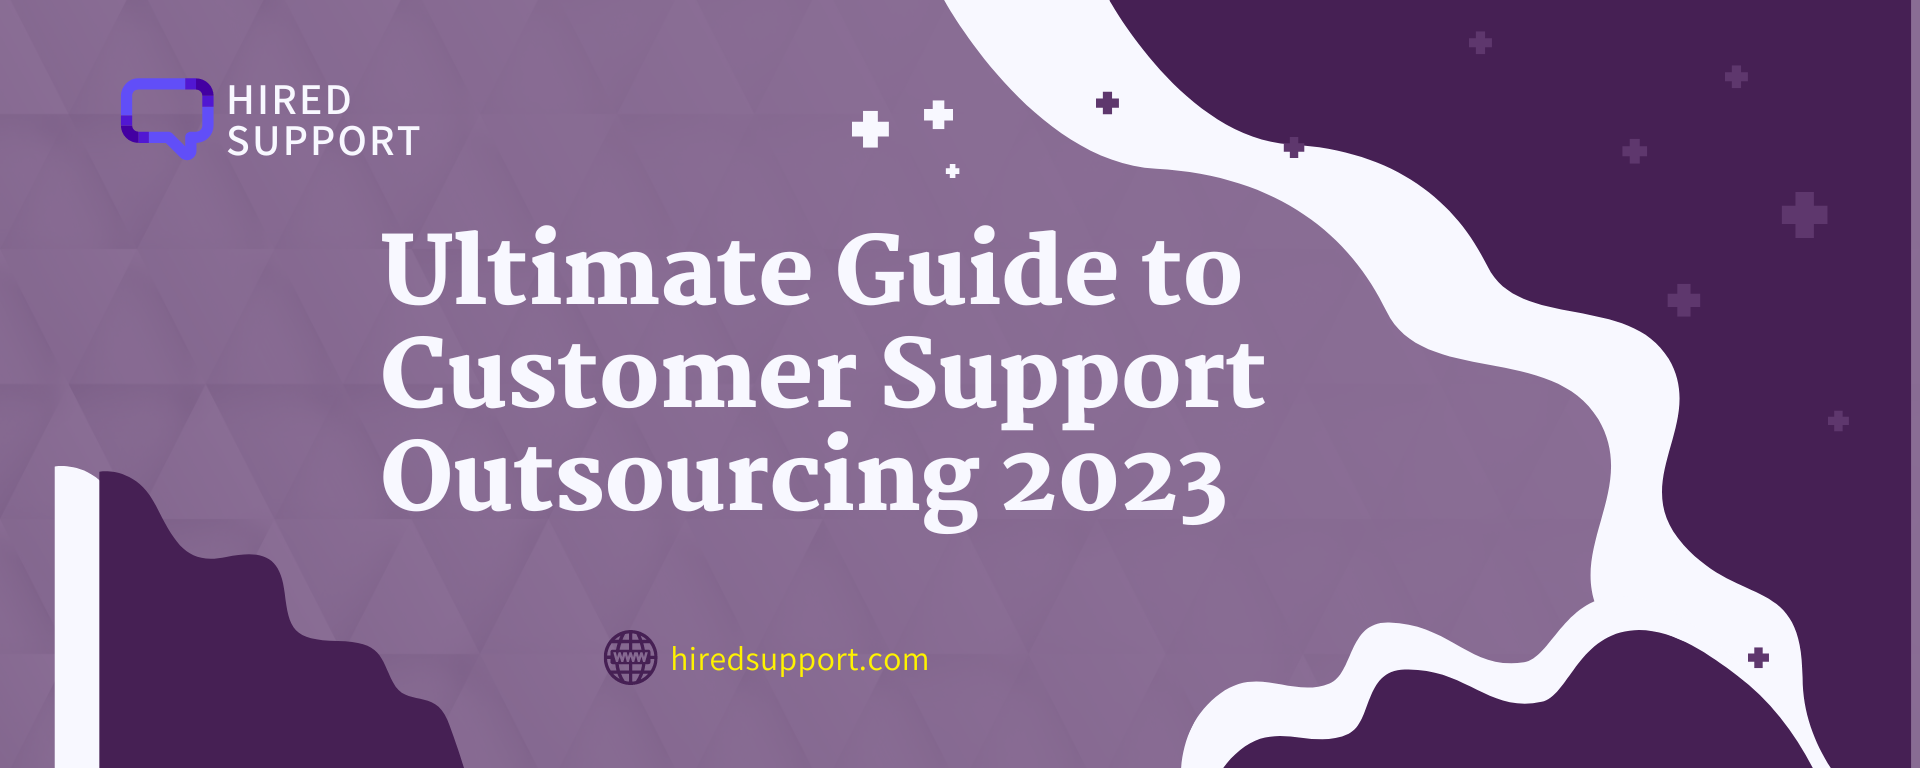 The Ultimate Guide to Customer Support Outsourcing 2023